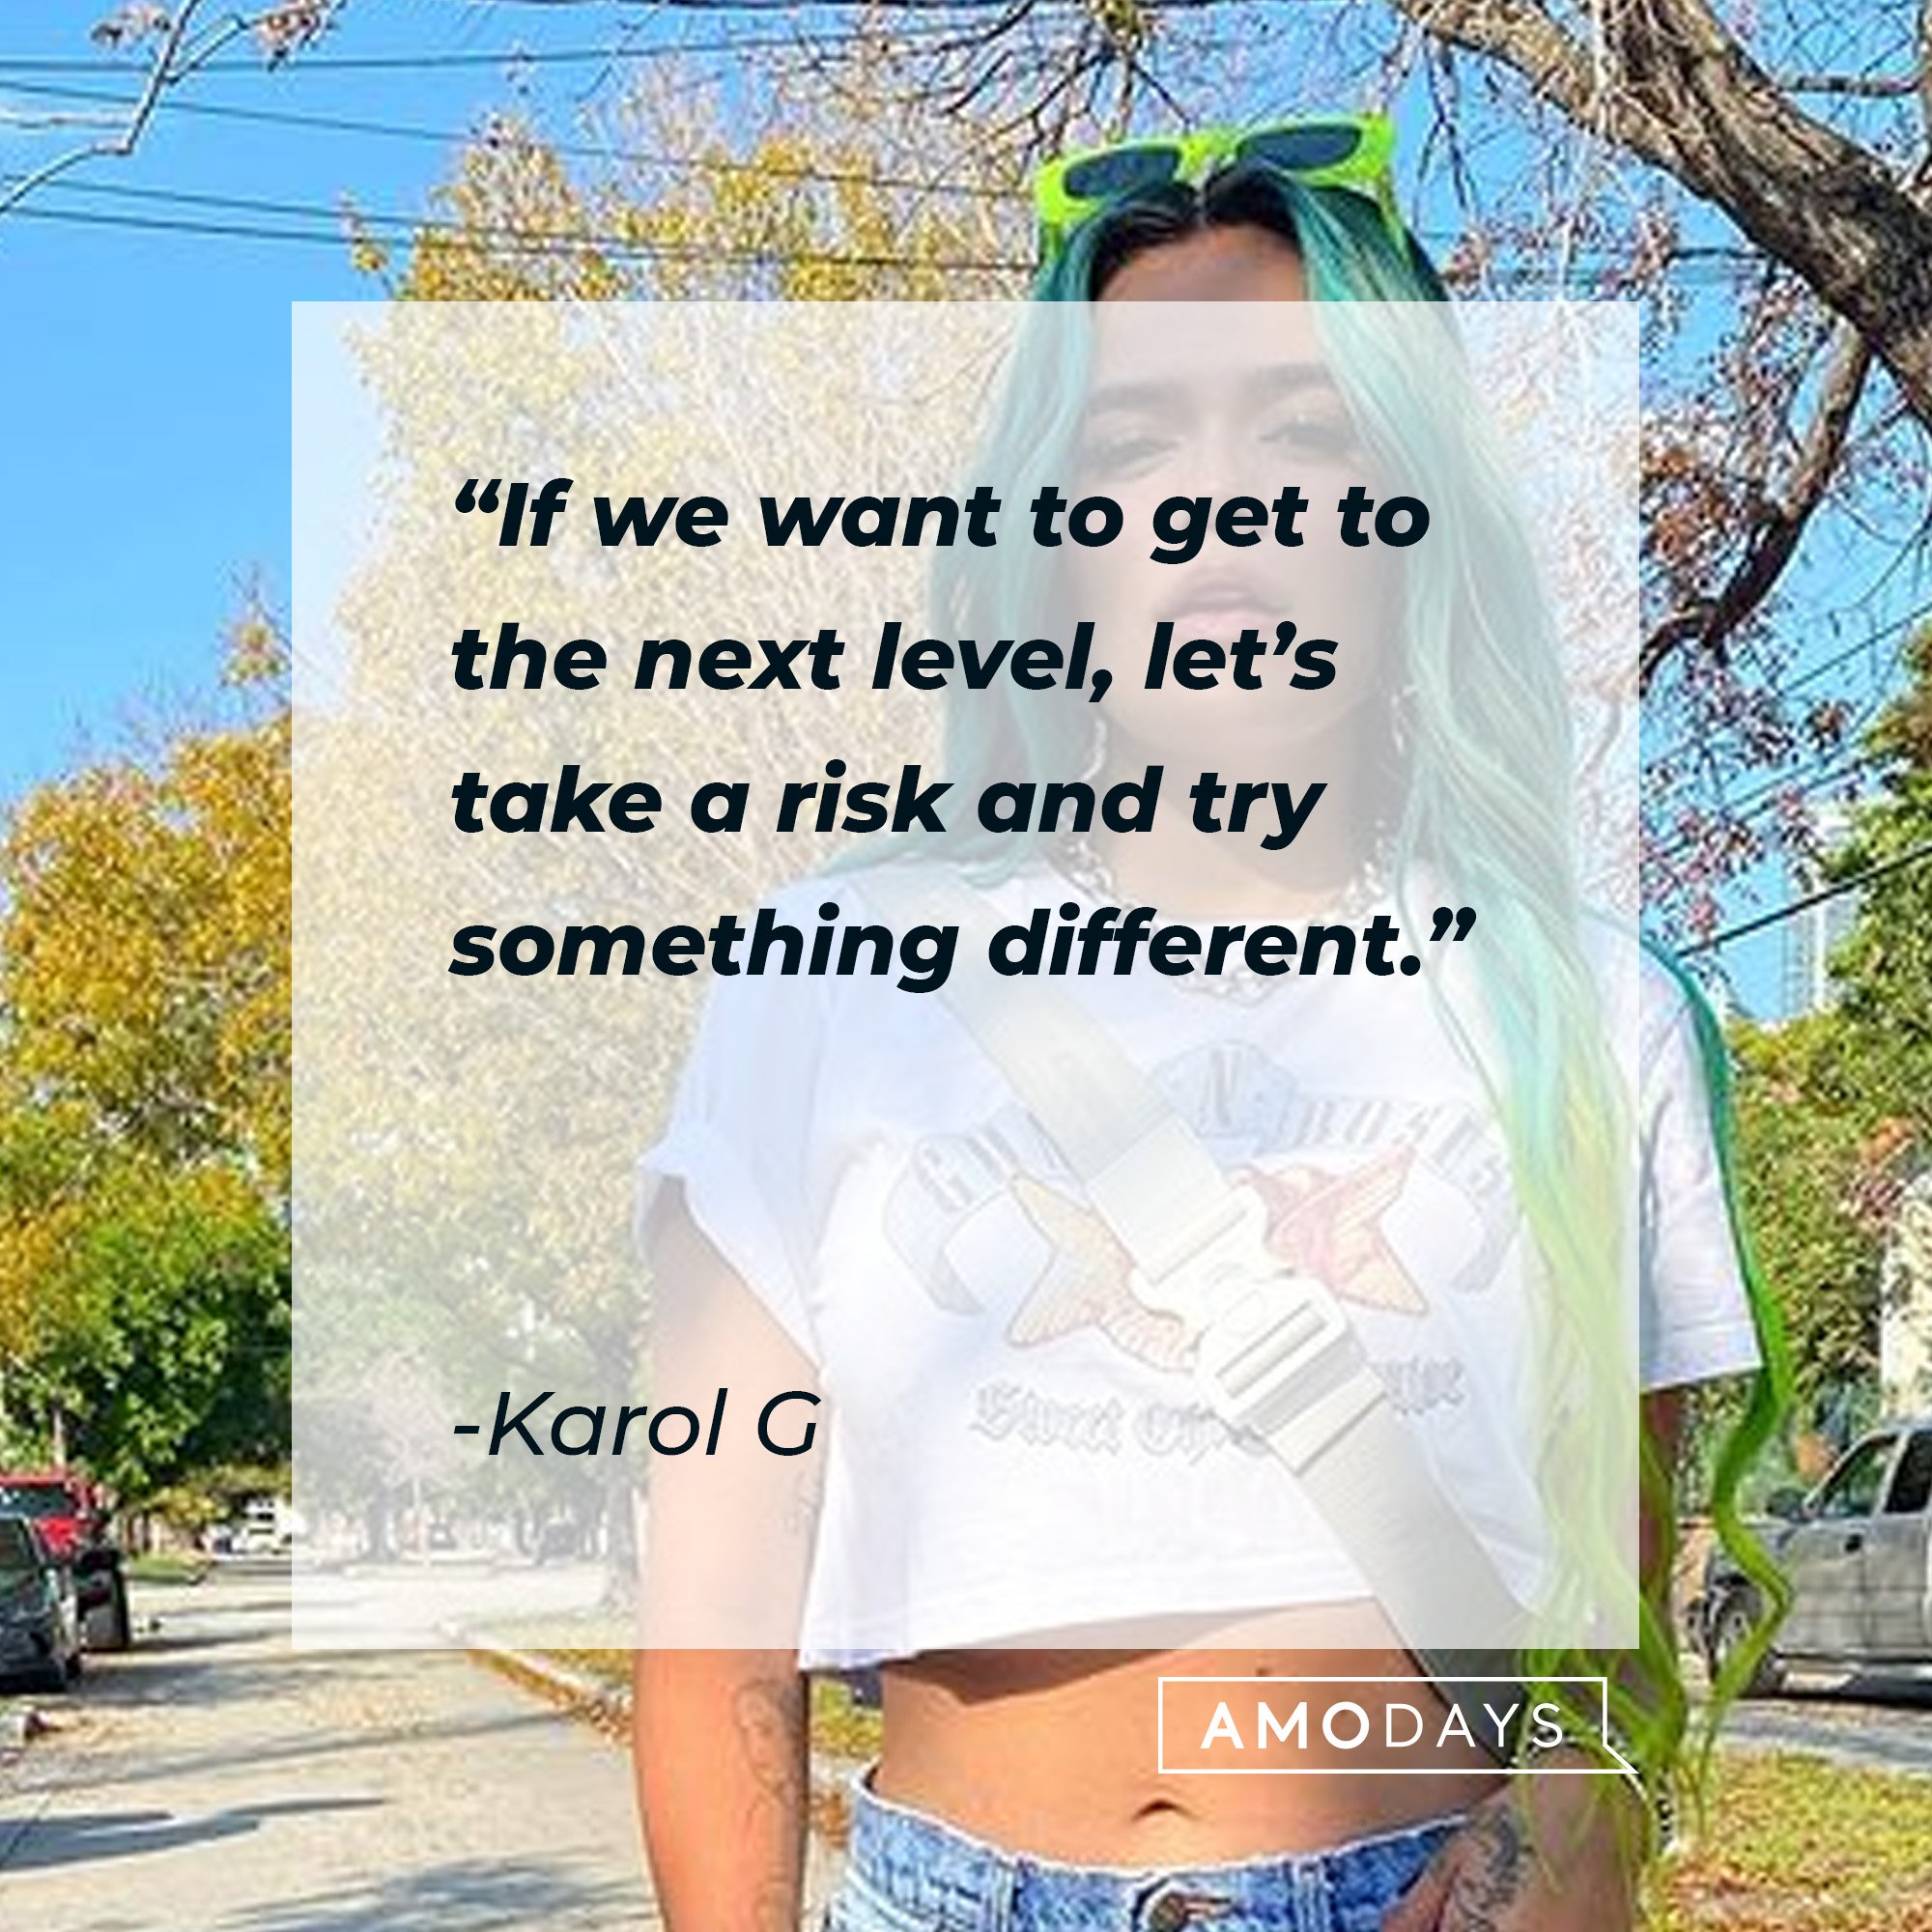 Karol G’s quote: "If we want to get to the next level, let's take a risk and try something different." | Image: AmoDays